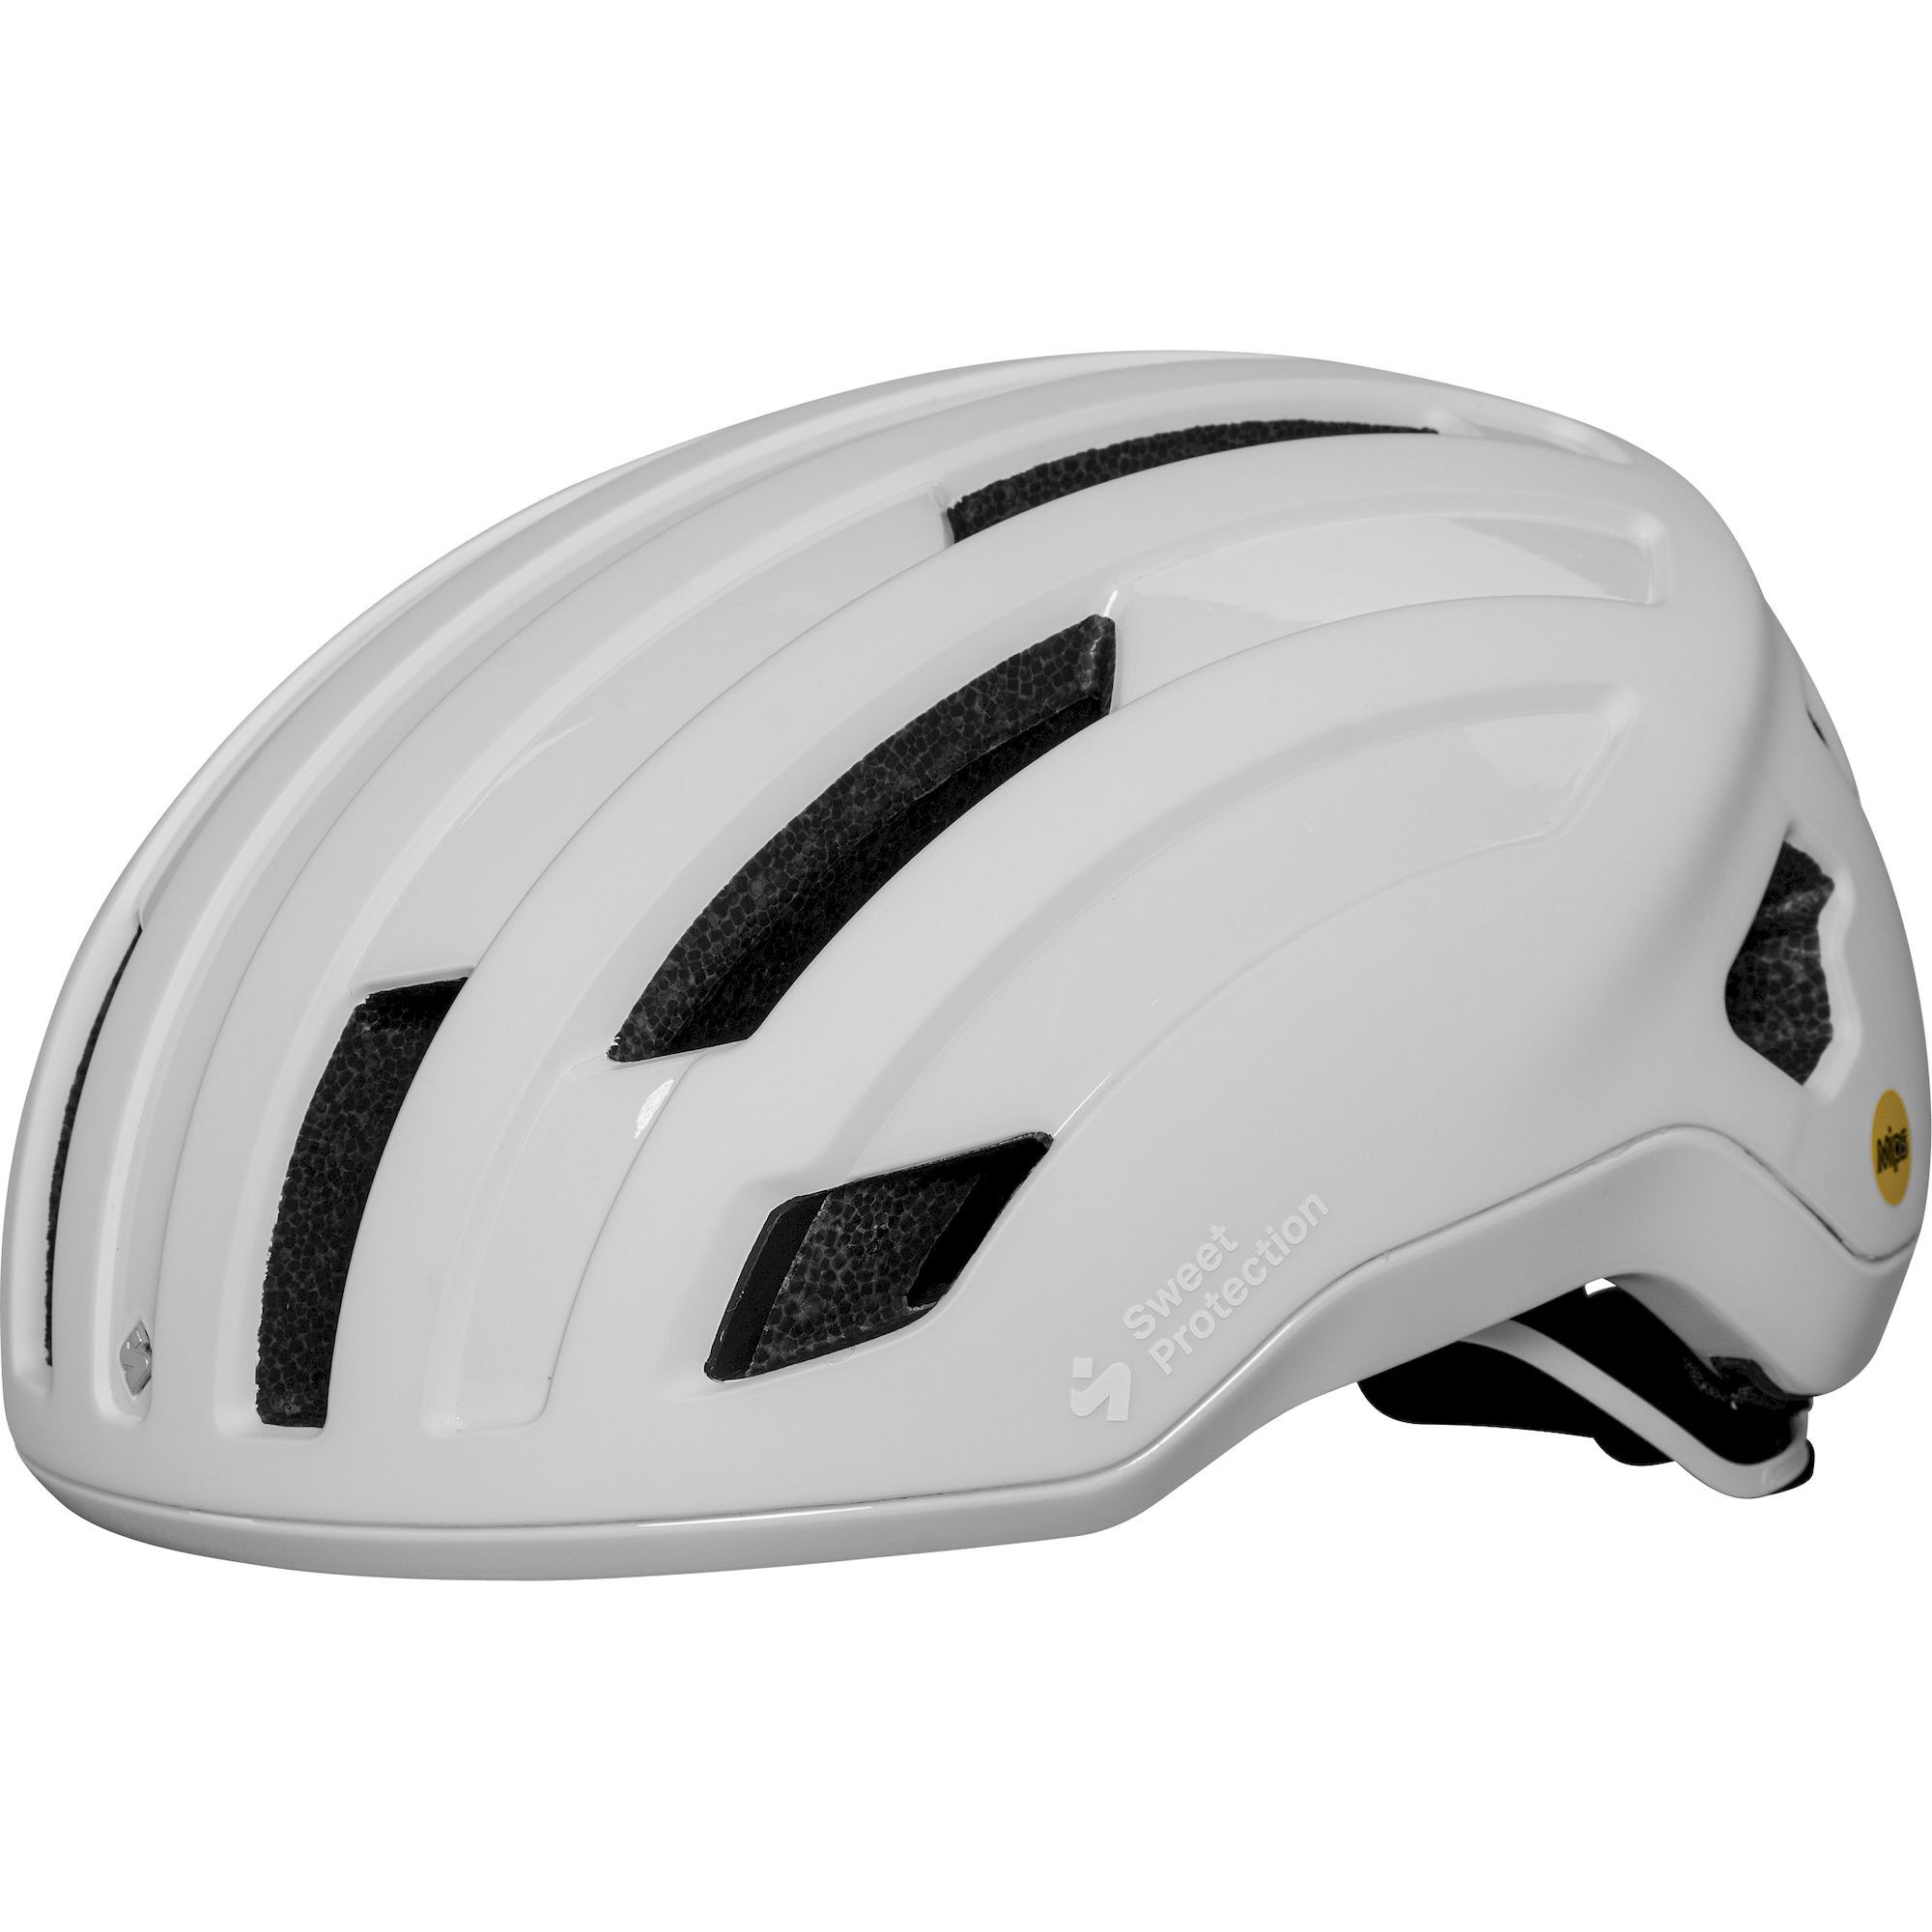 Sweet Protection Outrider MIPS Helmet - Casco ciclismo carretera